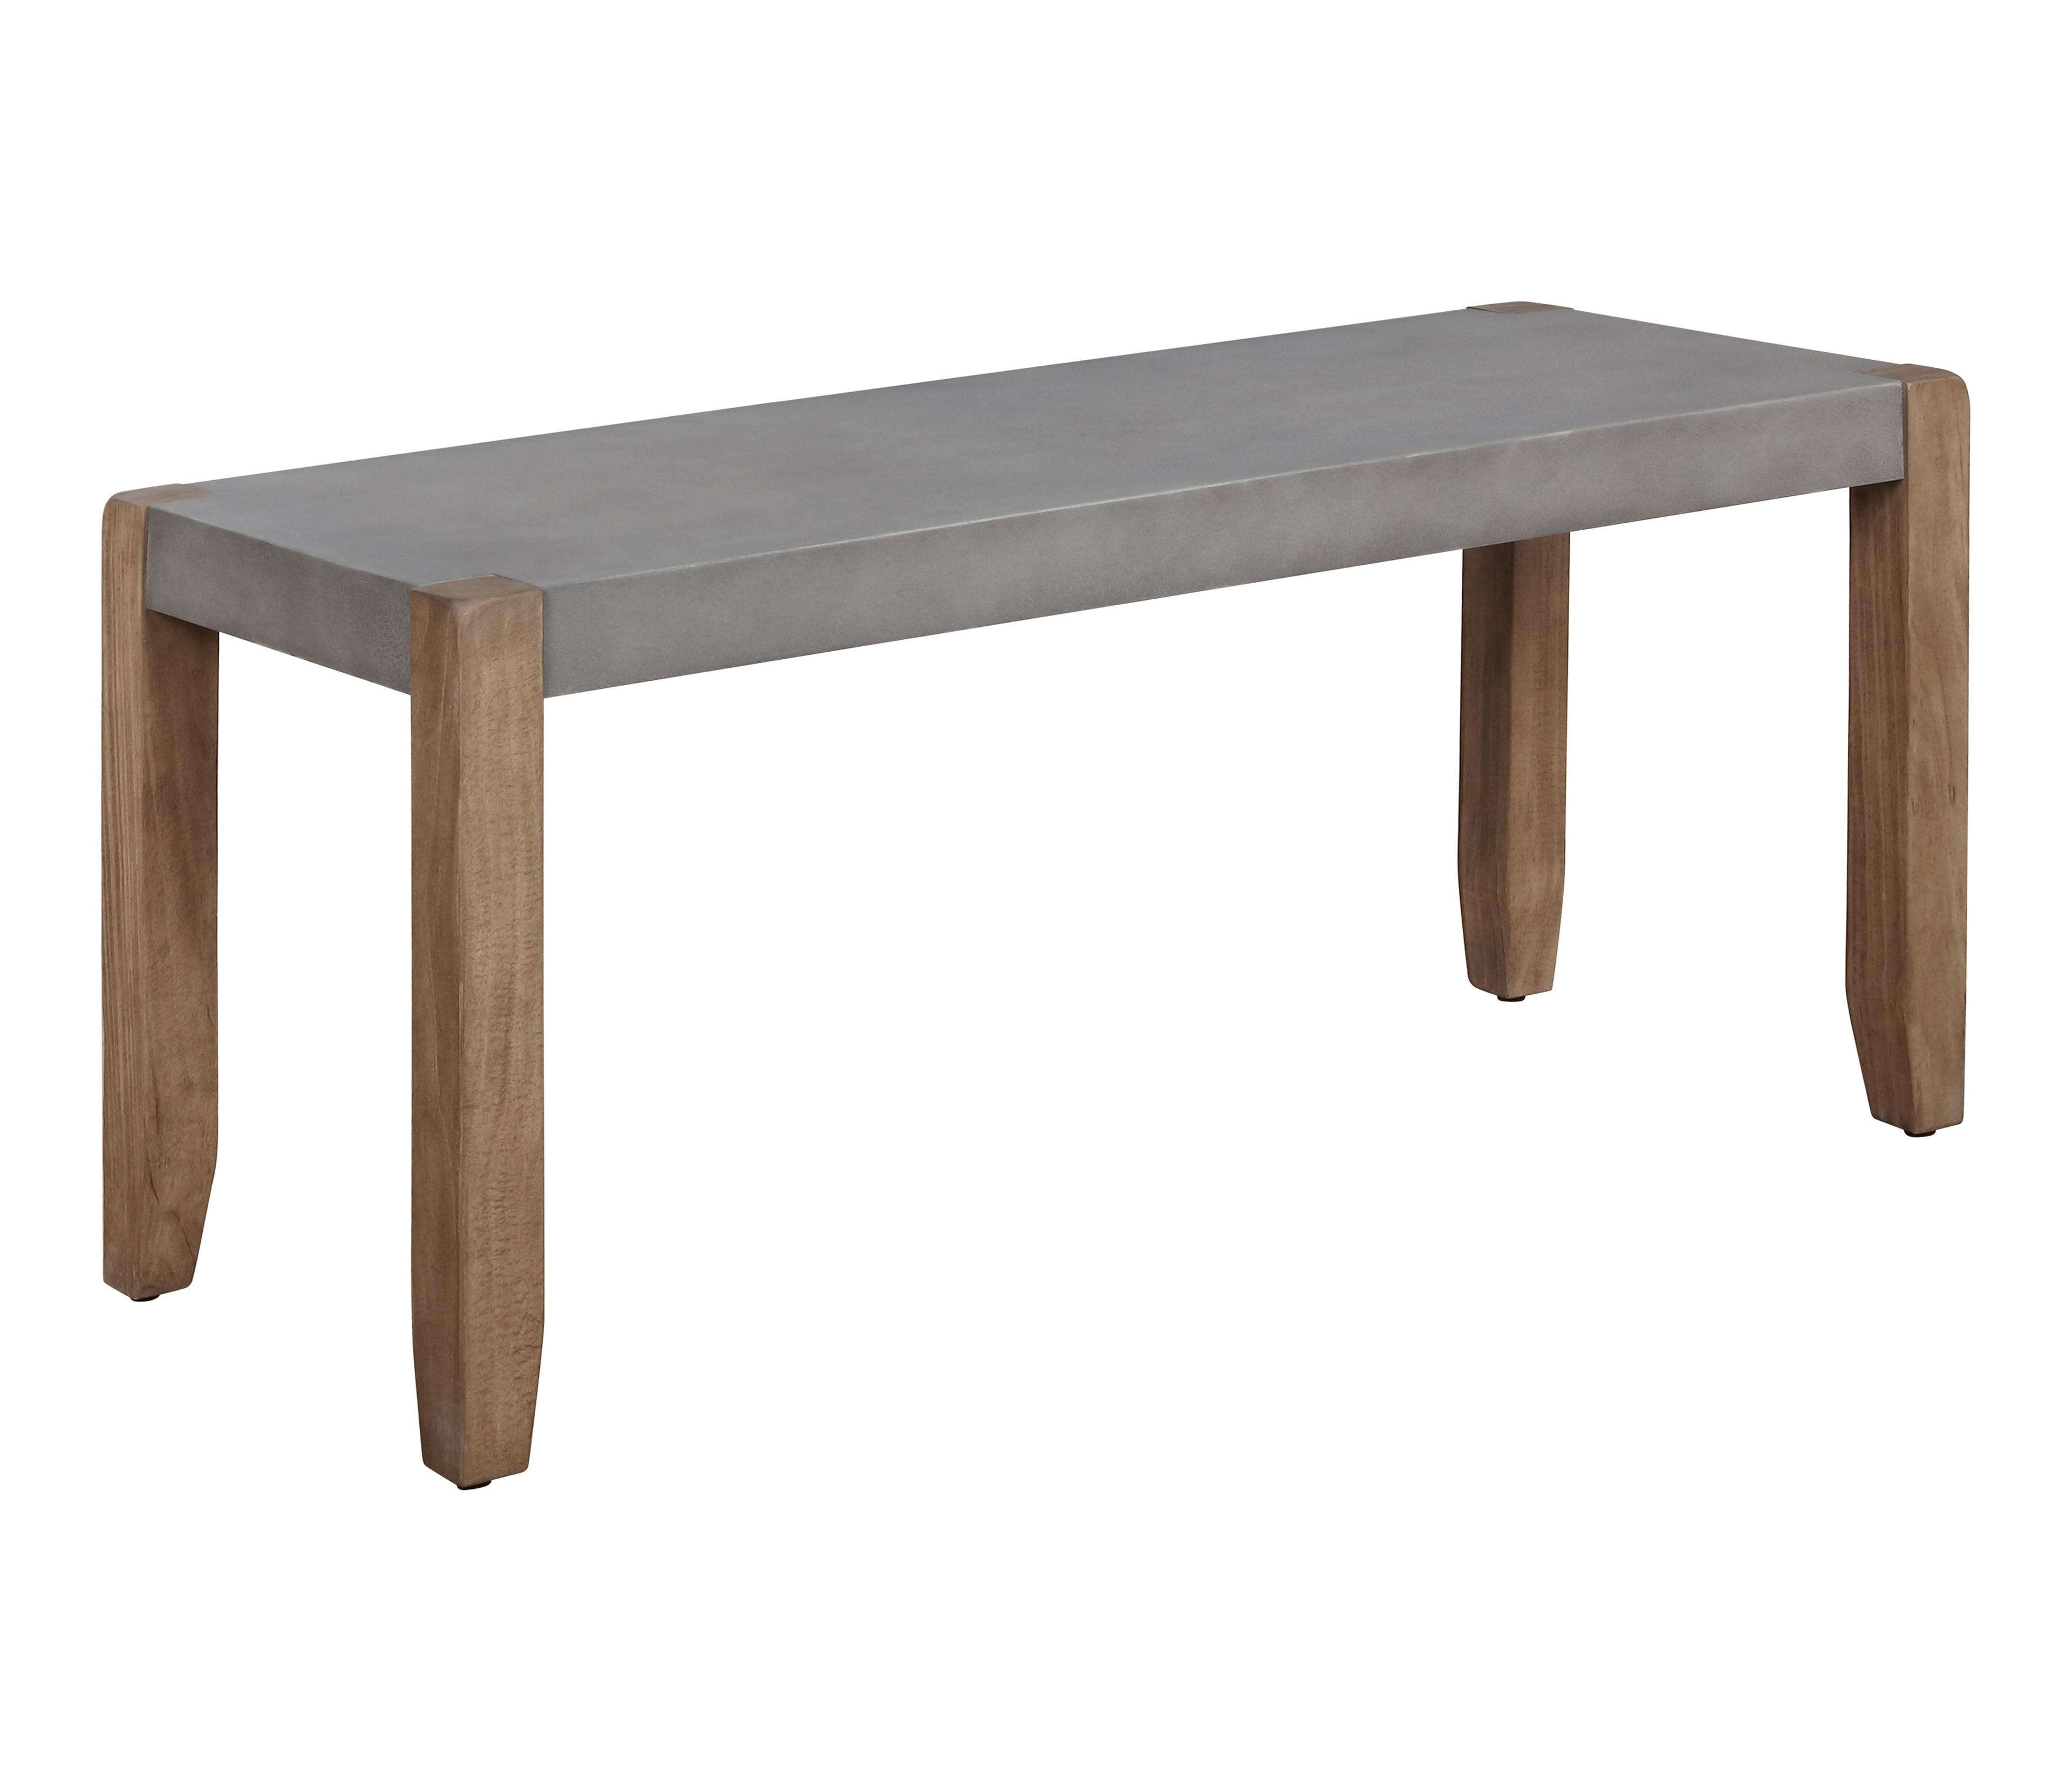 Newport 40" Faux Concrete and Wood Rustic Bench